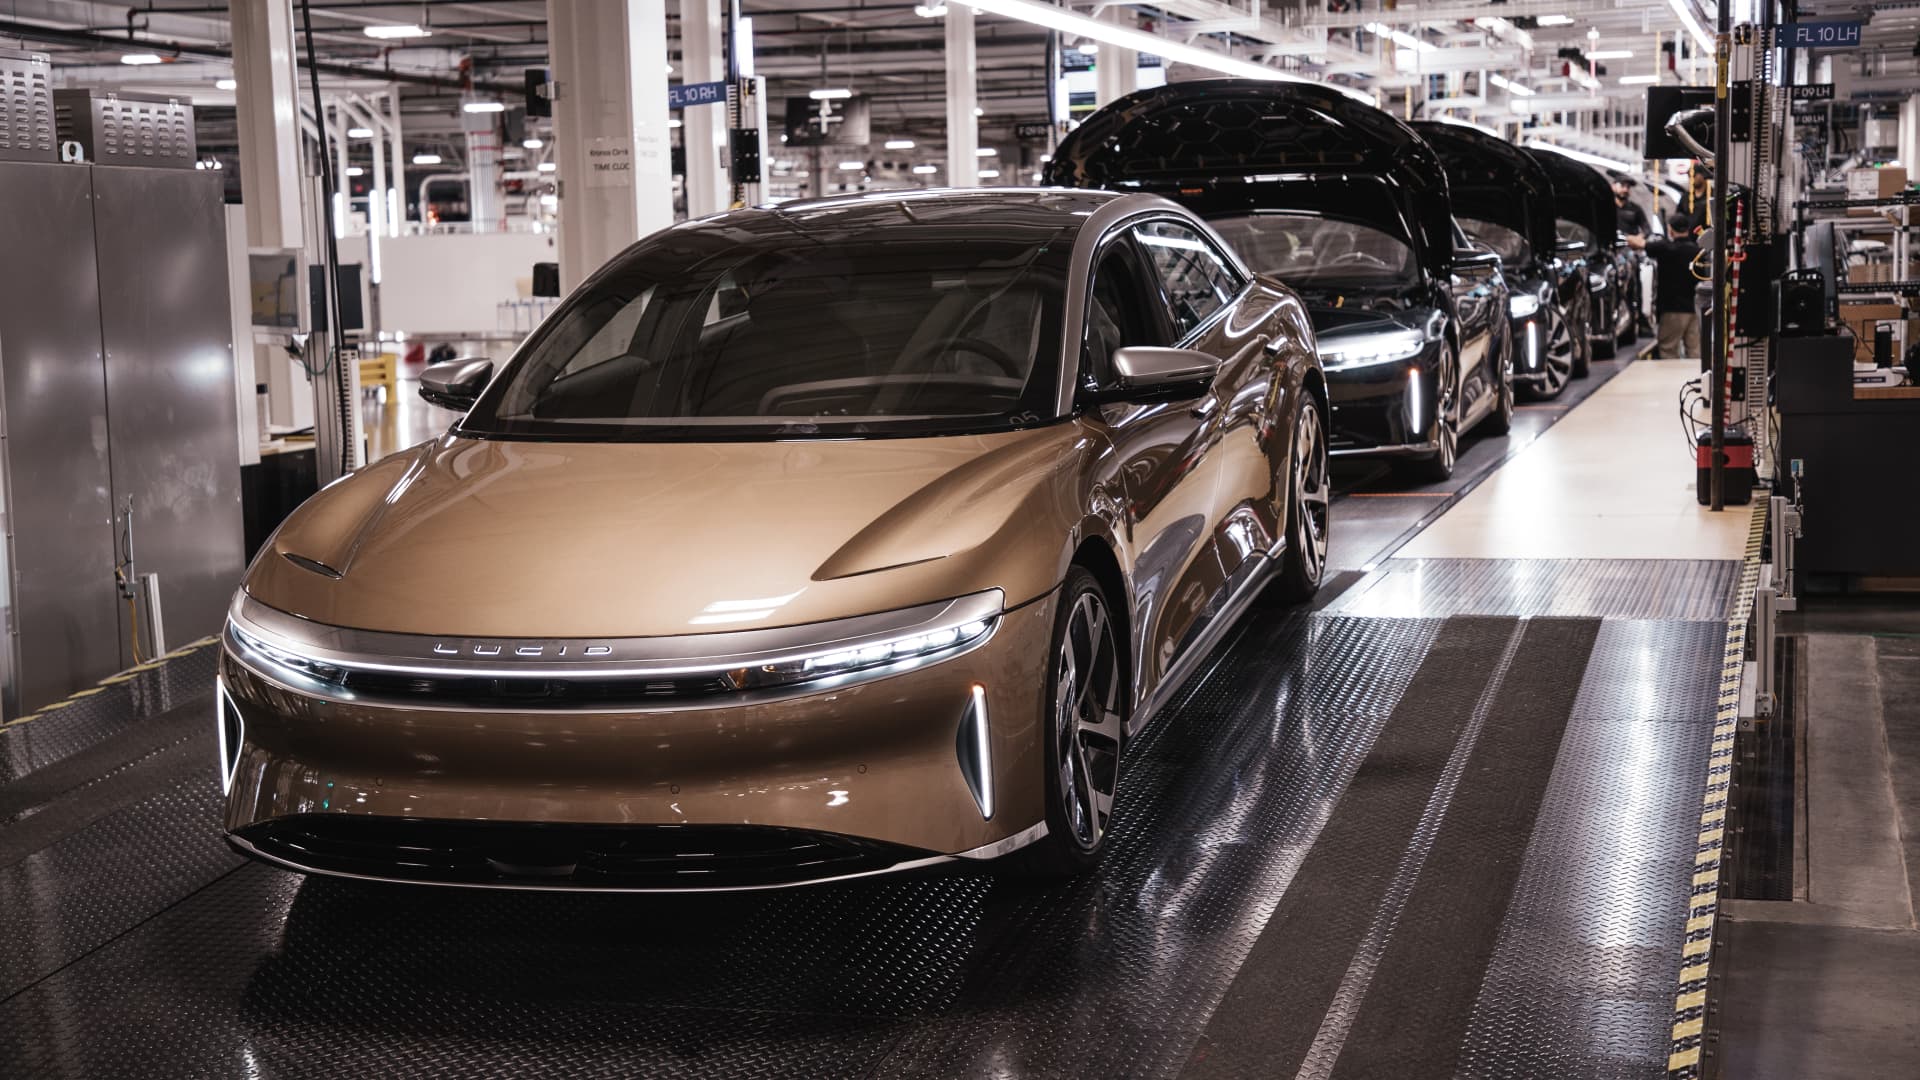 Luxurious EV maker Lucid confirms or now not it is heading within the correct path to meet conservative 2022 manufacturing targets